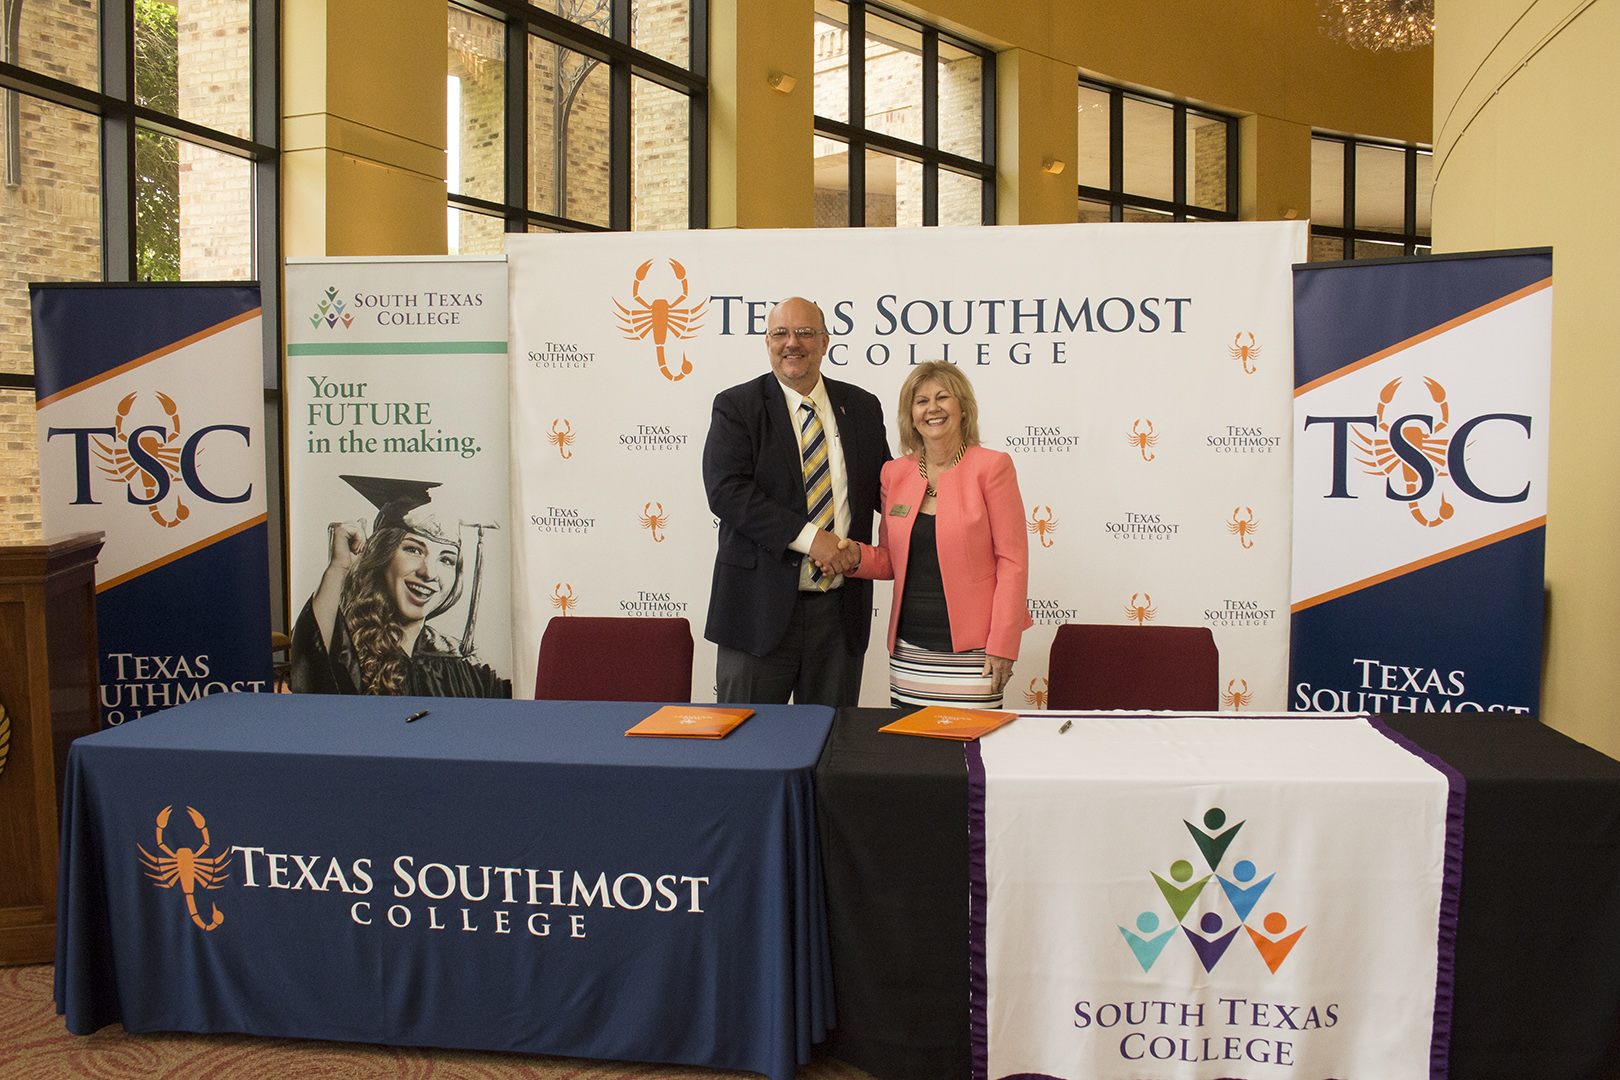 Texas Southmost College (TSC) Interim President Mike Shannon and South Texas College (STC) President Shirley A. Reed shake hands after signing an articulation agreement on July 10, 2017 at the TSC Arts Center in Brownsville, Texas.